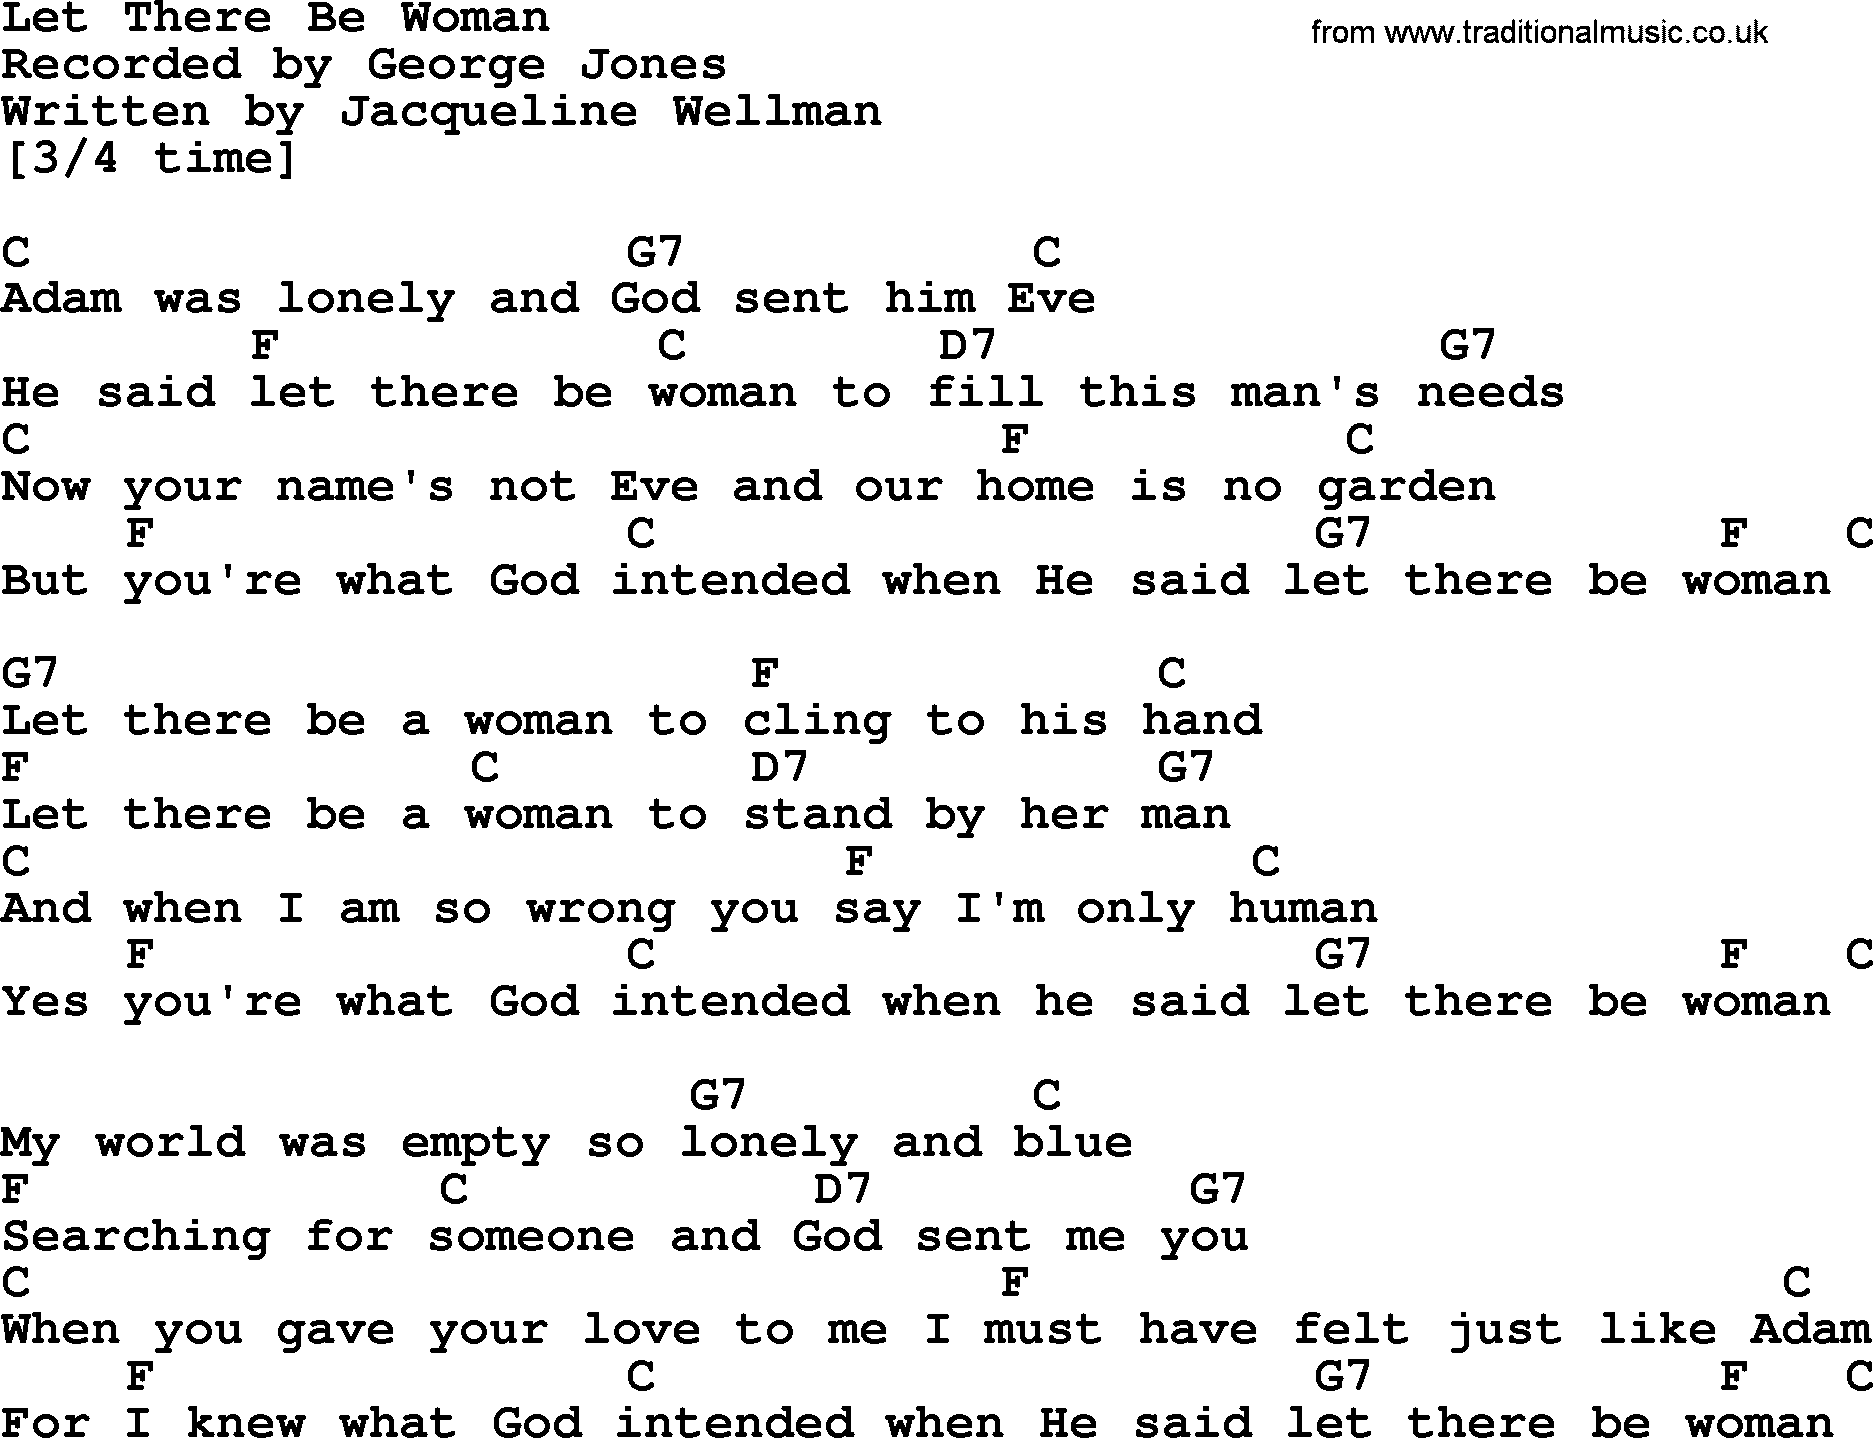 George Jones song: Let There Be Woman, lyrics and chords